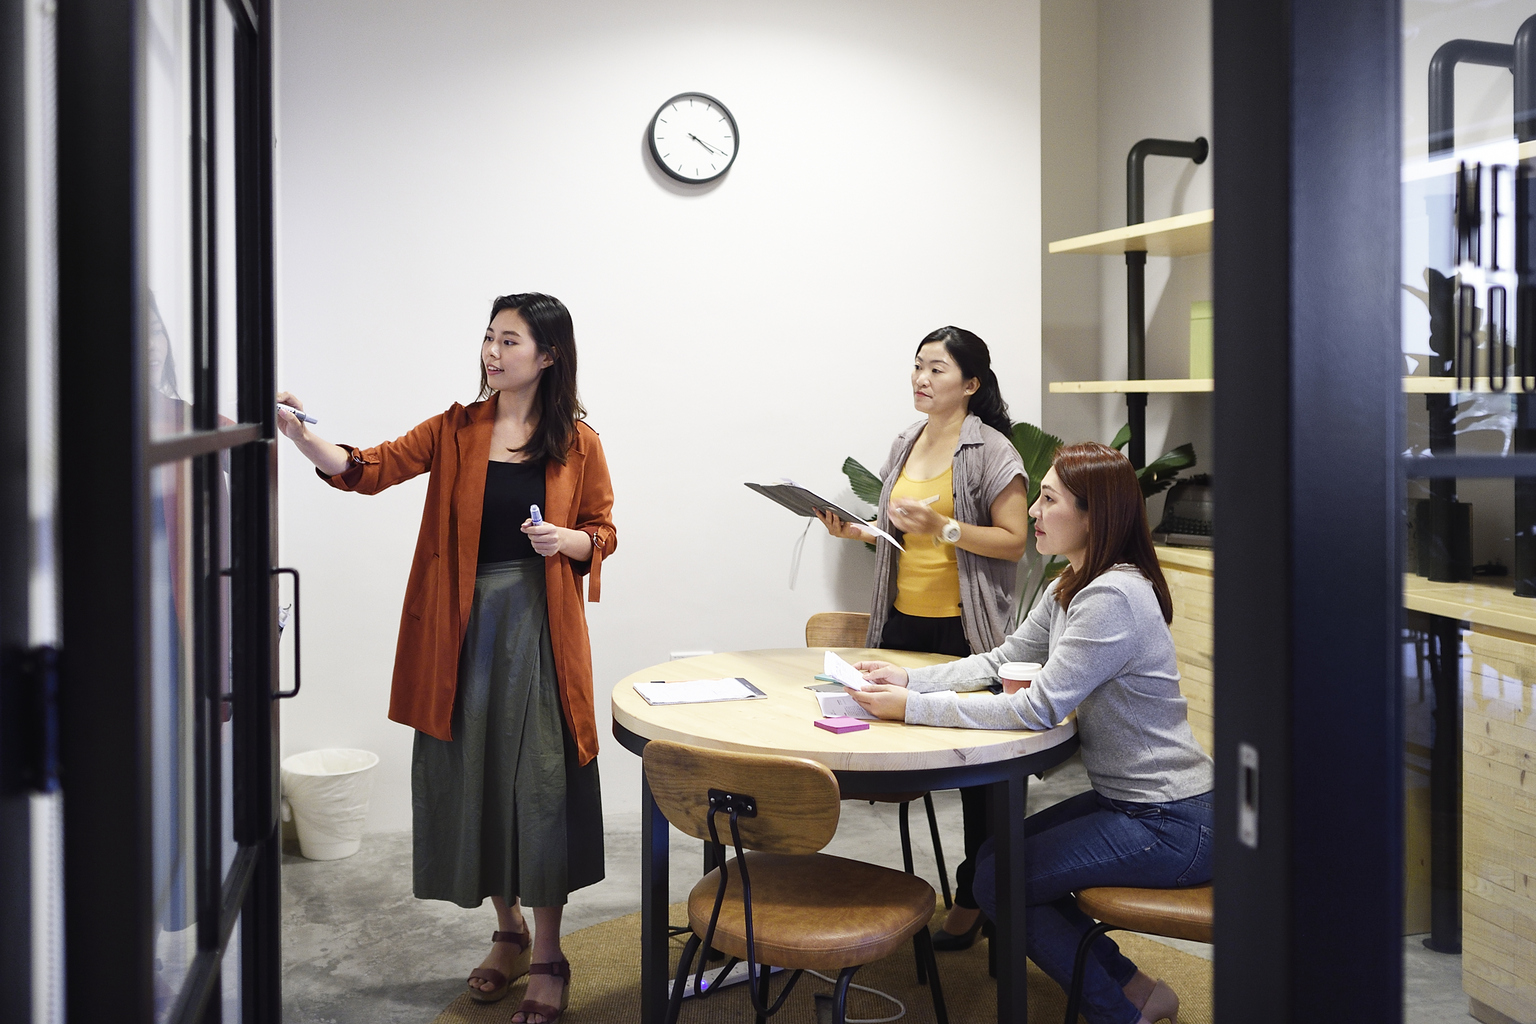 Chinese women brainstorming in an office at night